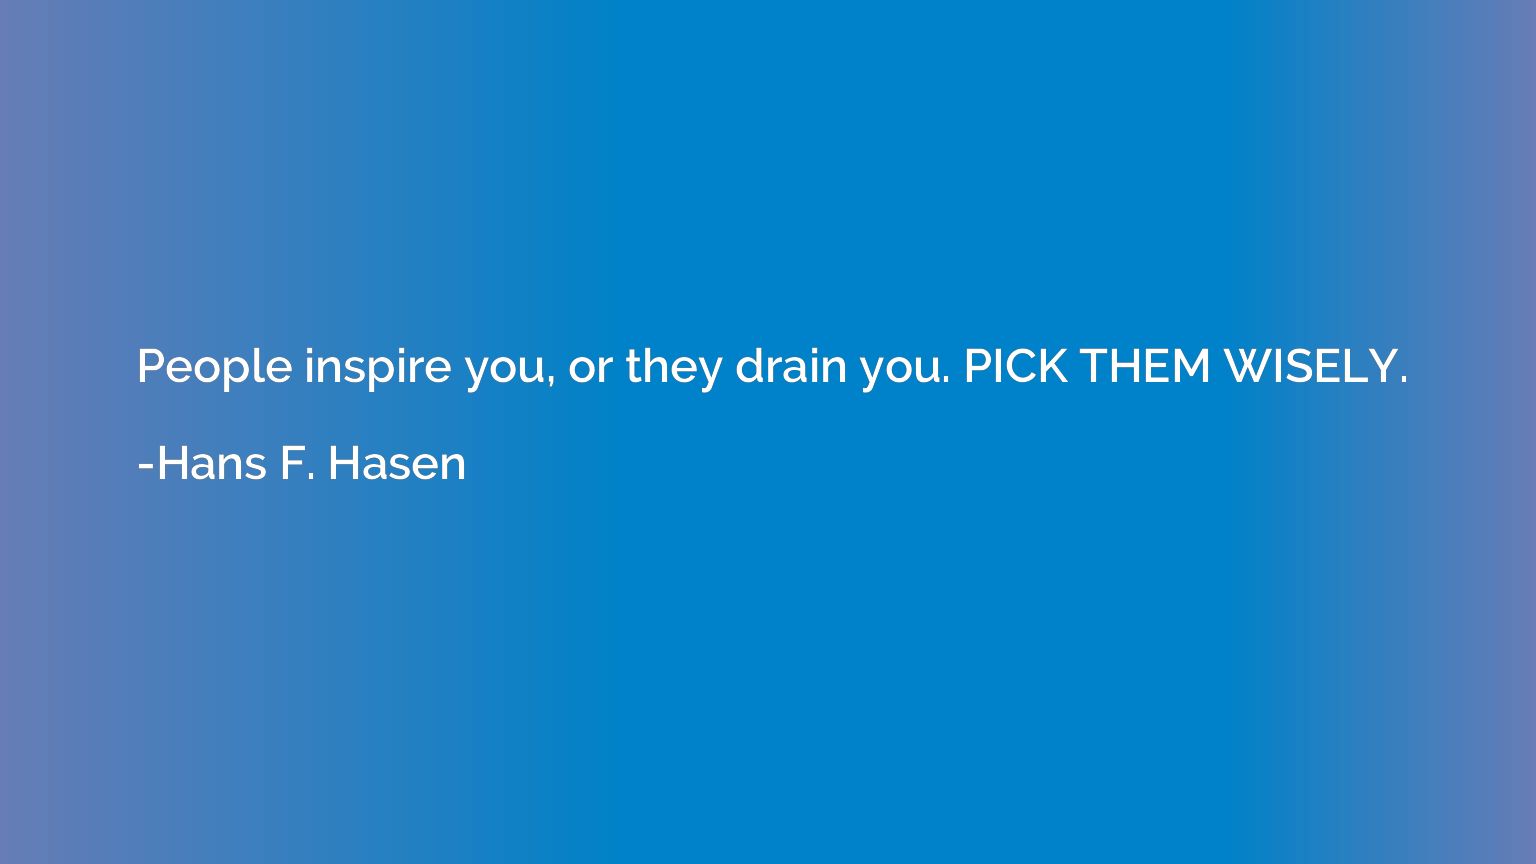 People inspire you, or they drain you. PICK THEM WISELY.